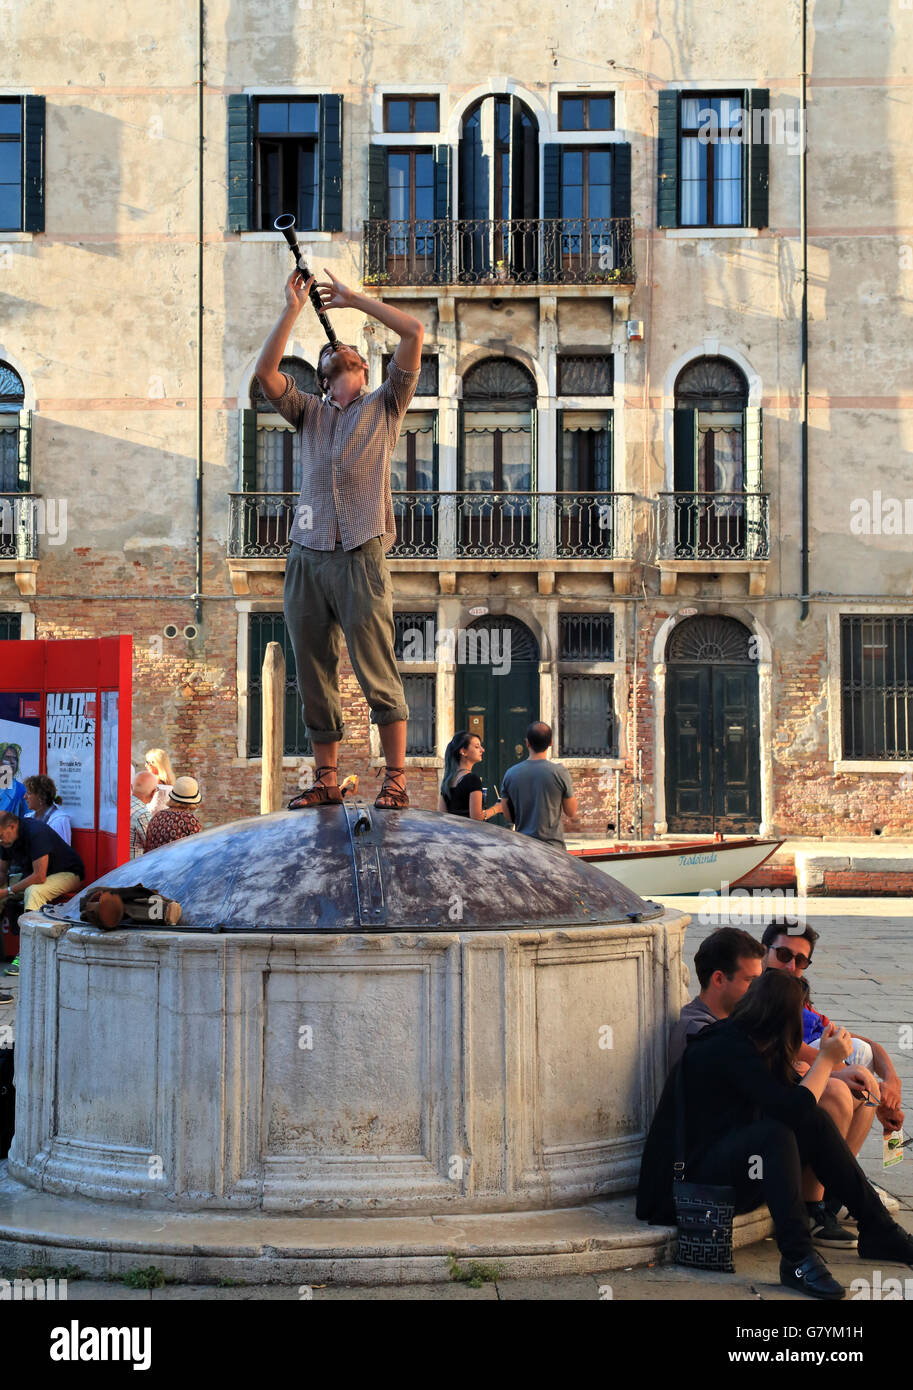 Busker street musician playing on a water well in Venice Stock Photo